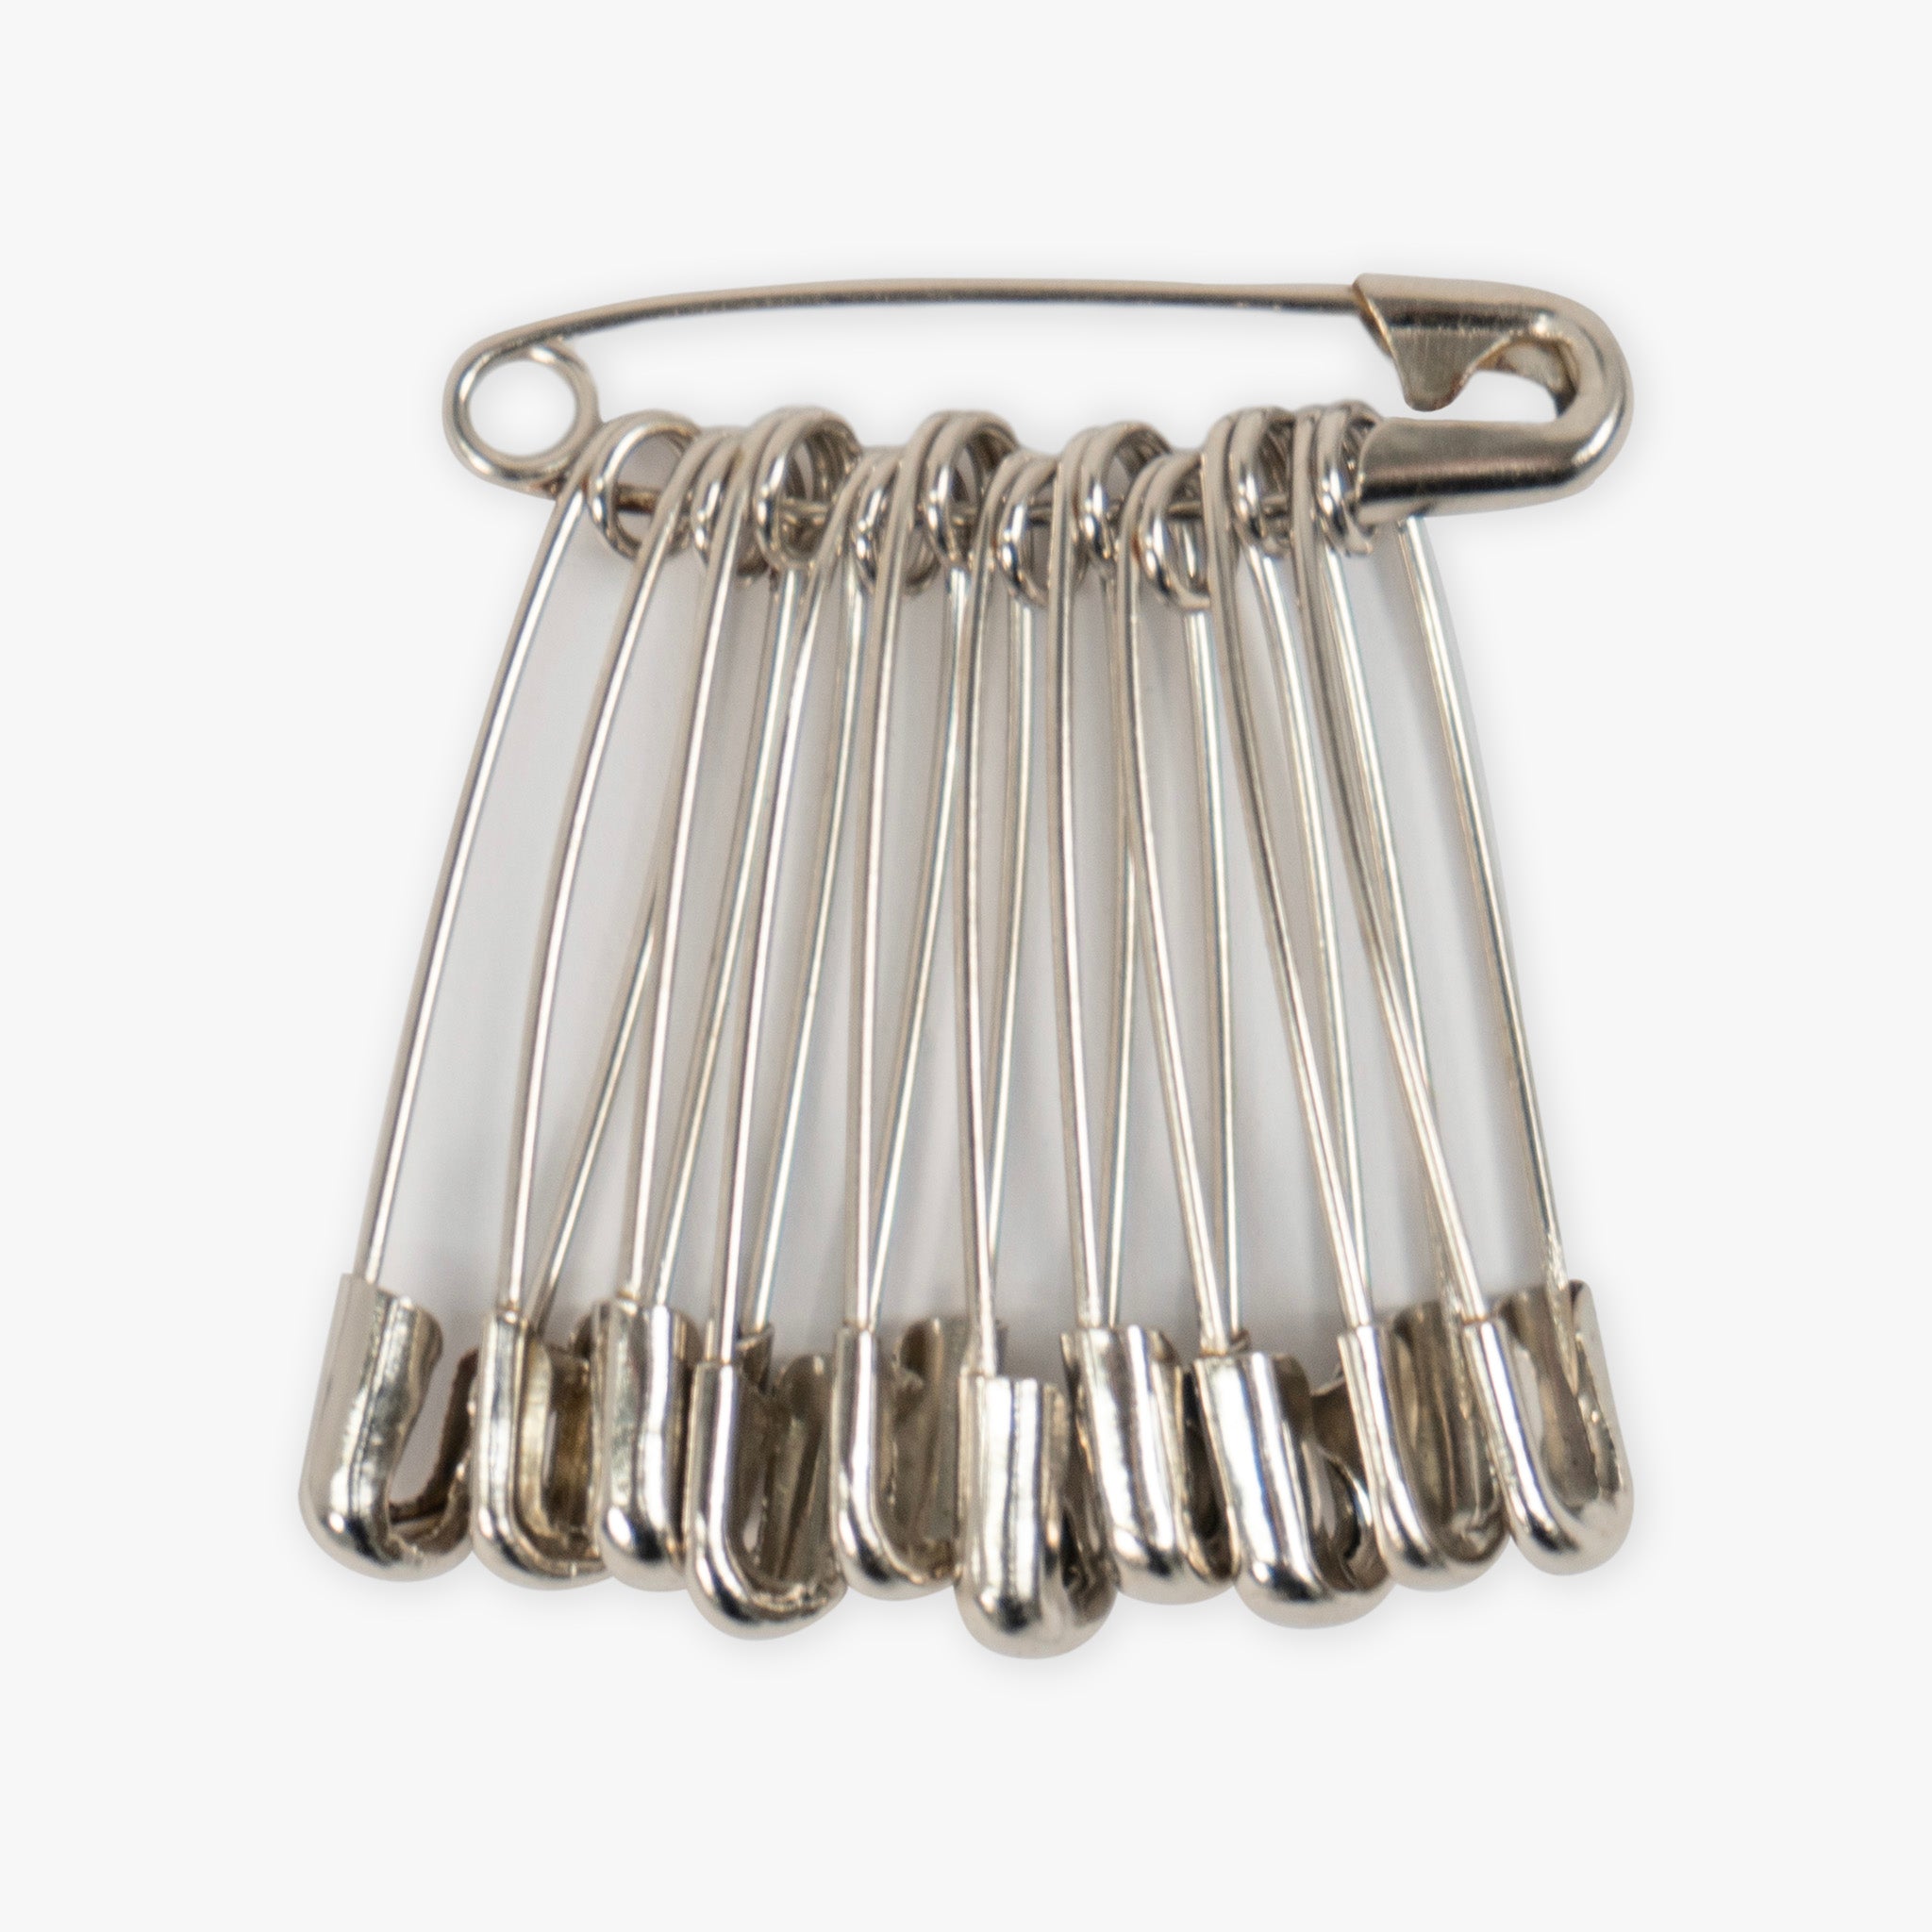 Safety Pin Bunch